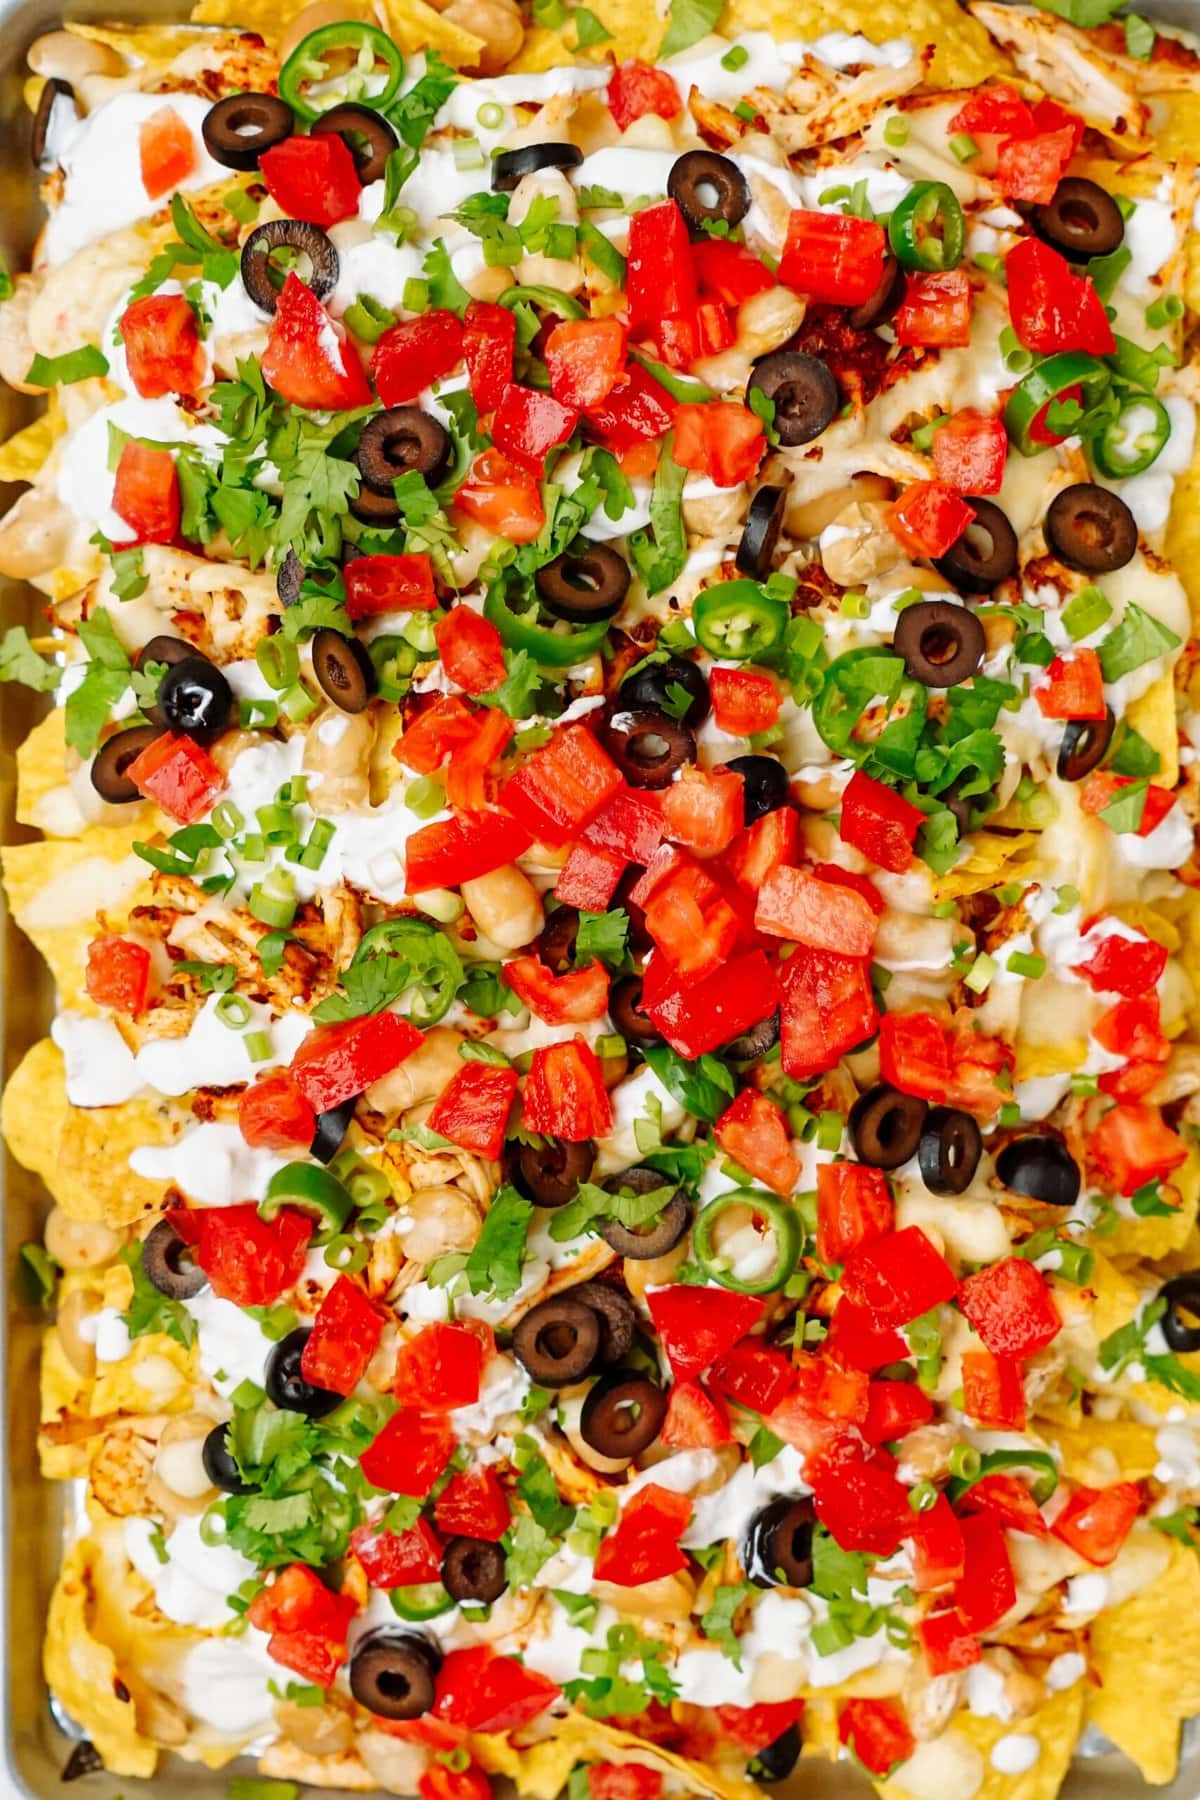 A close-up of a tray filled with nachos topped with melted cheese, diced tomatoes, black olives, jalapeños, chopped cilantro, and dollops of sour cream.